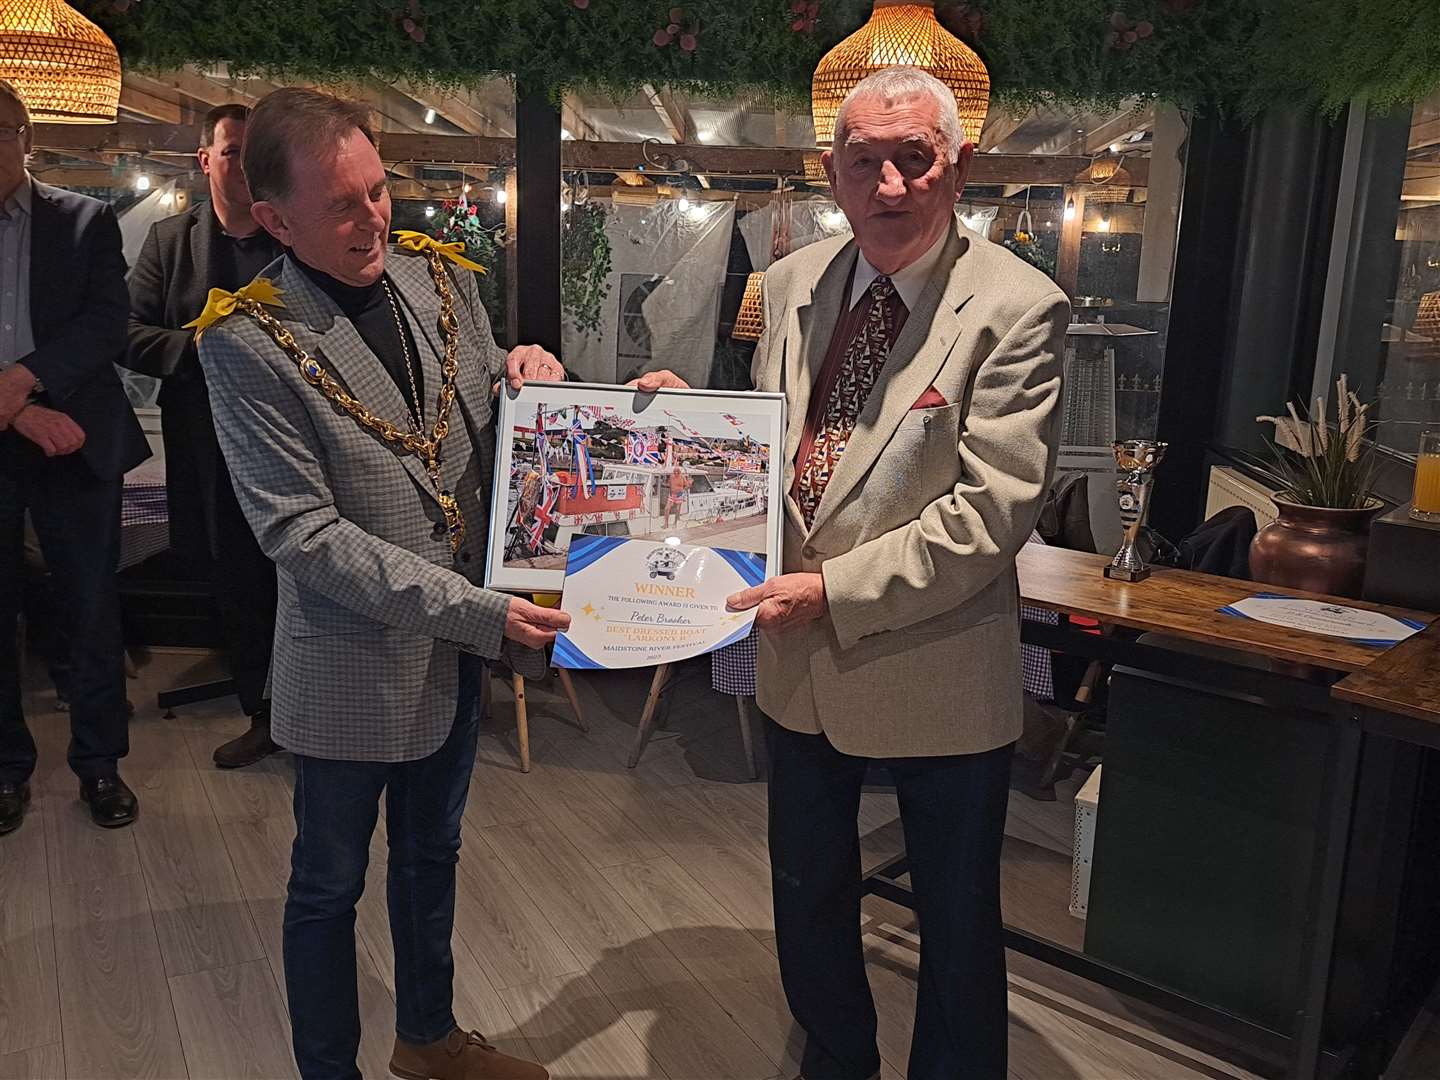 The Mayor presents a prize to the winner of the best dressed craft, Peter Brooker